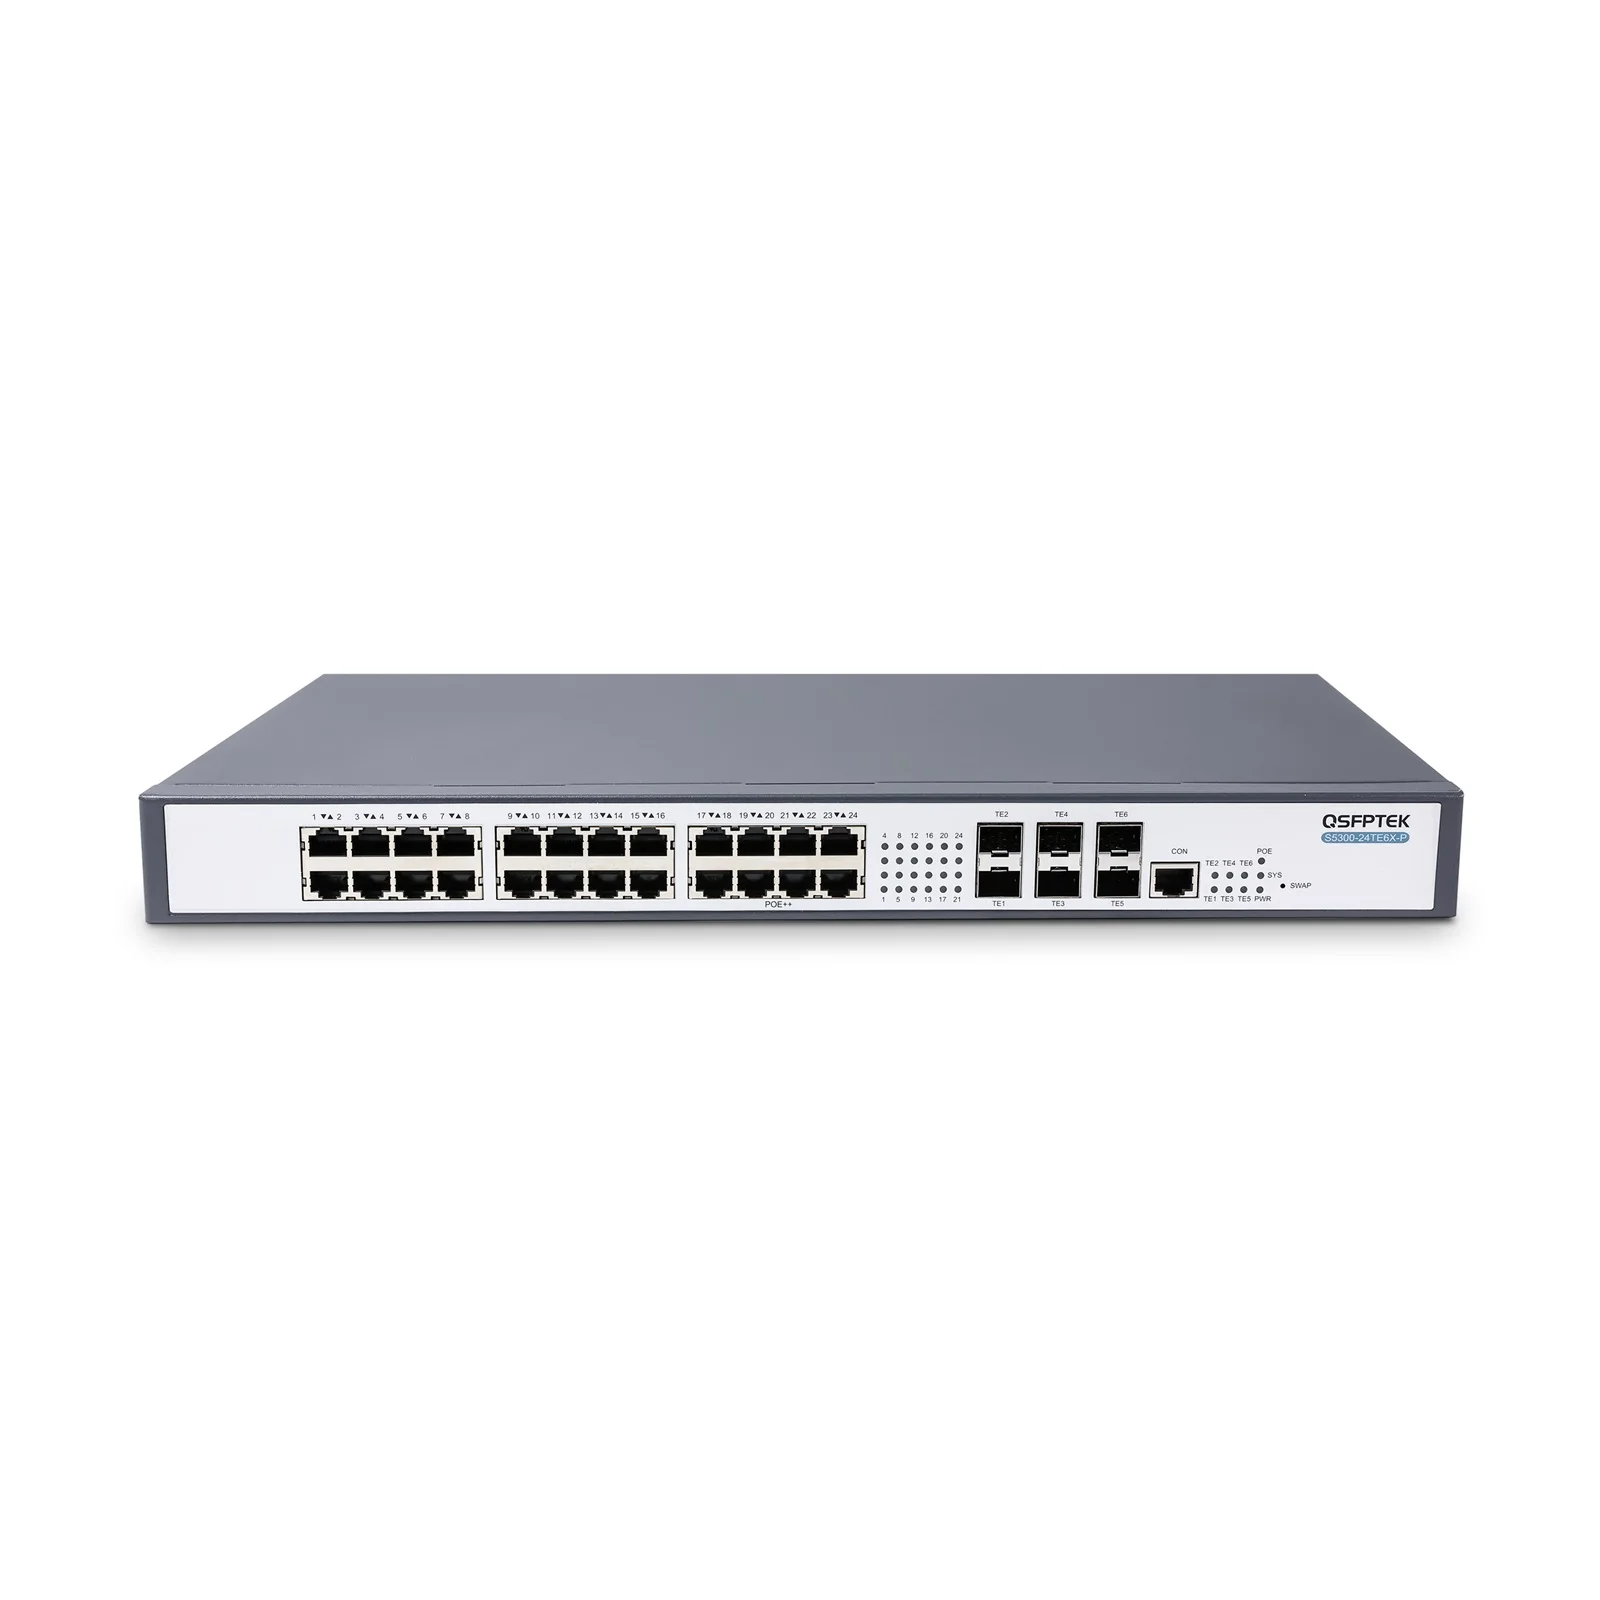 Multi-Gig Switches – 6-Port 10G Switch